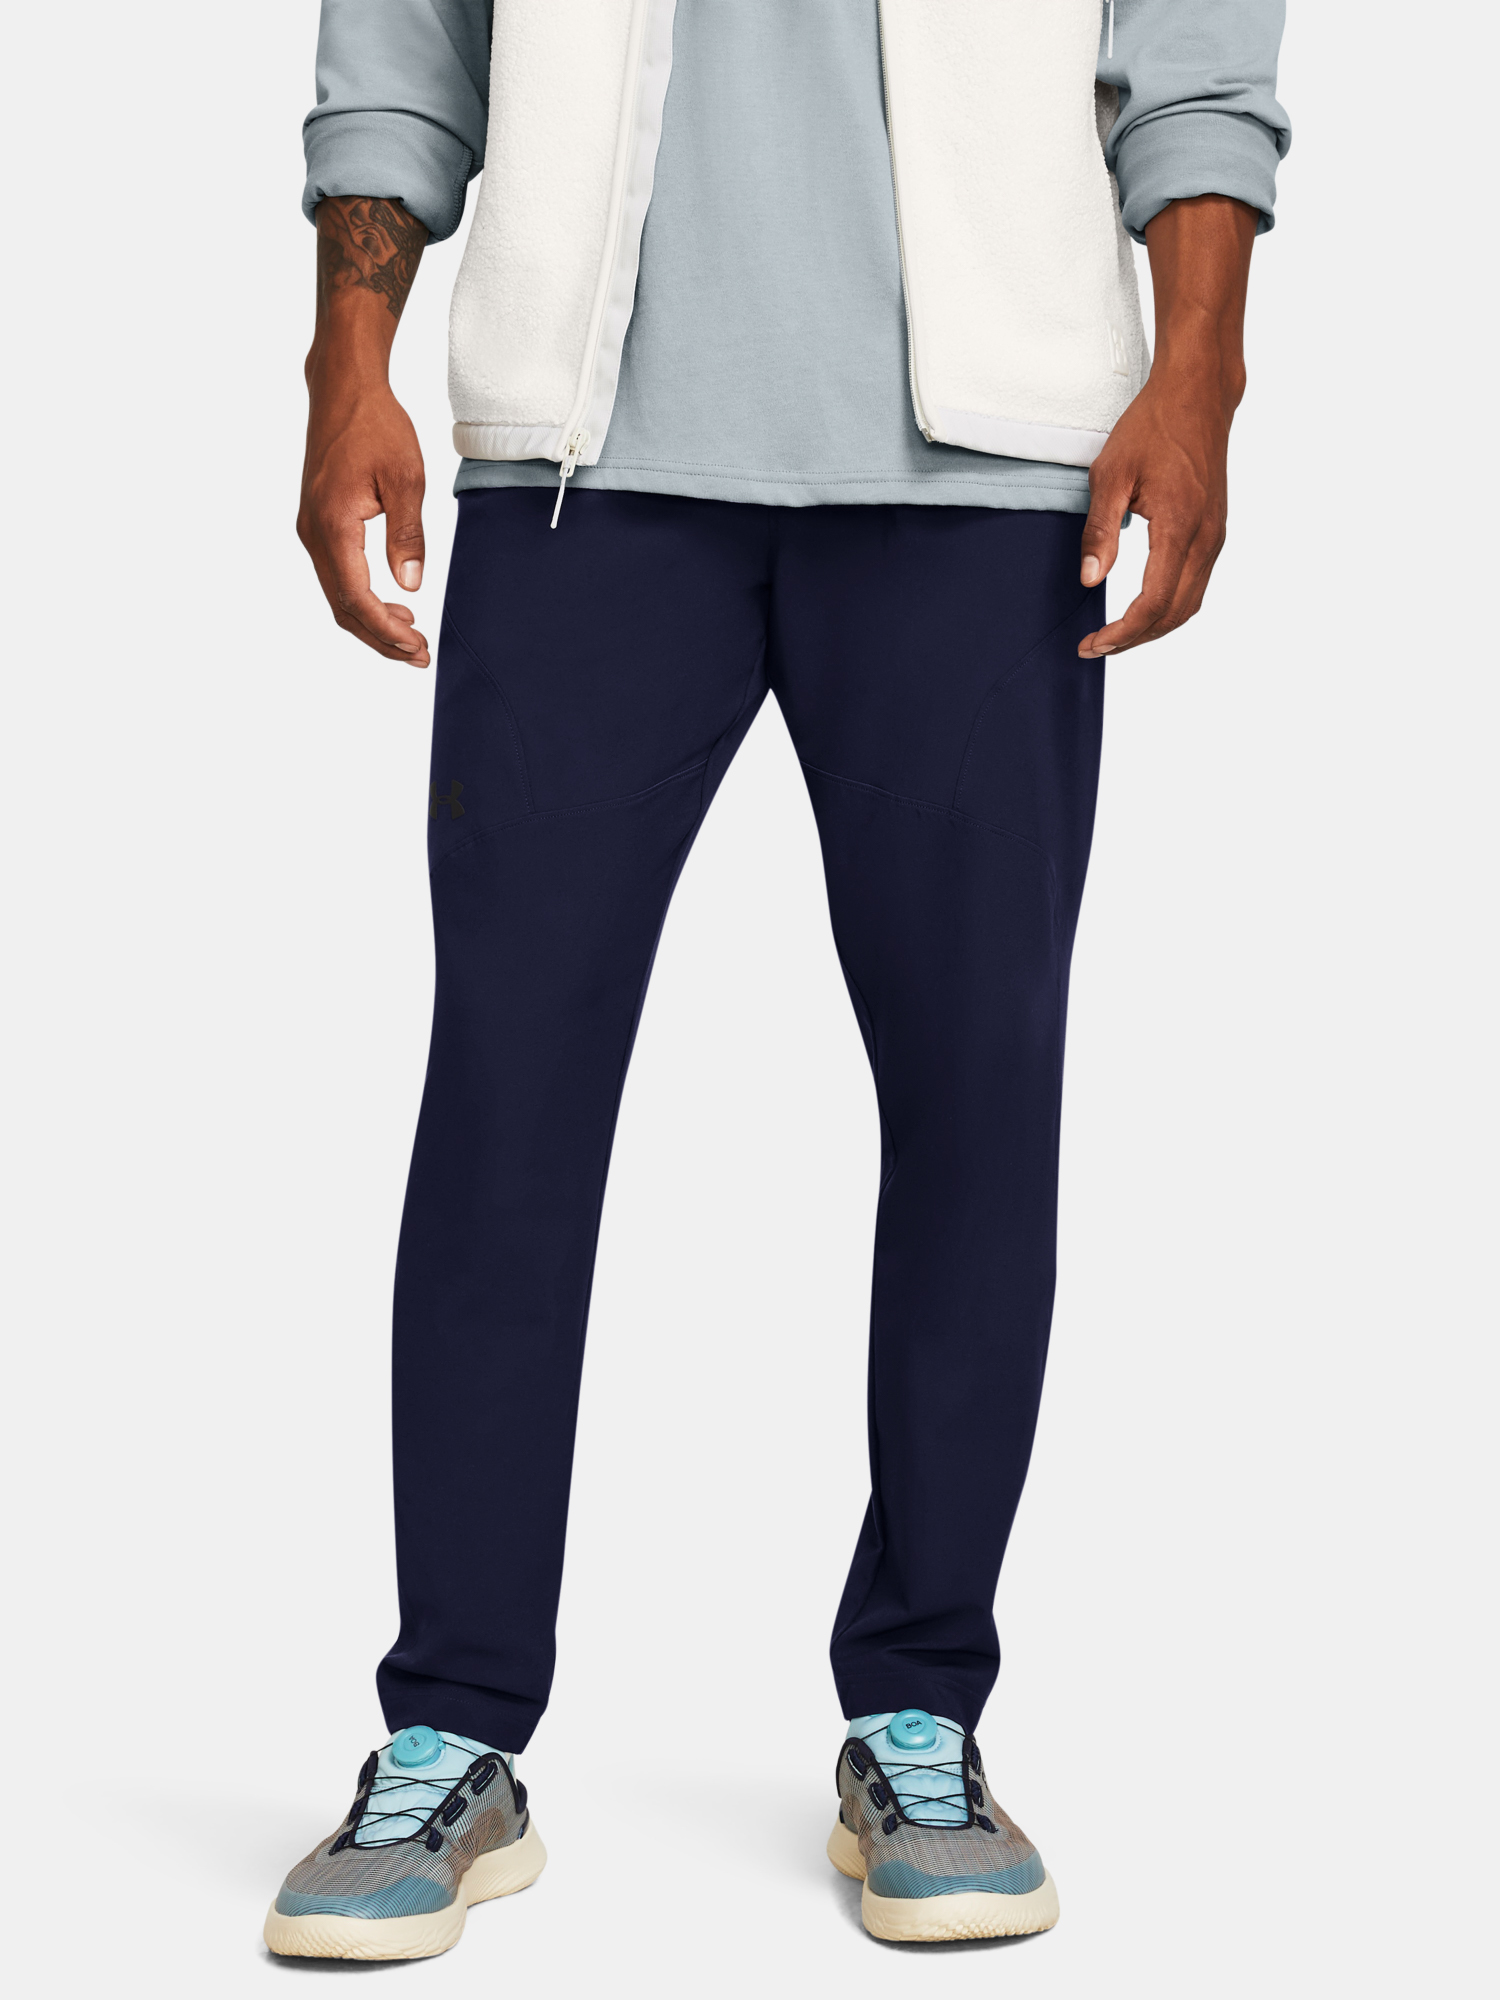 Under Armour Mens UA Unstoppable Tapered Pants